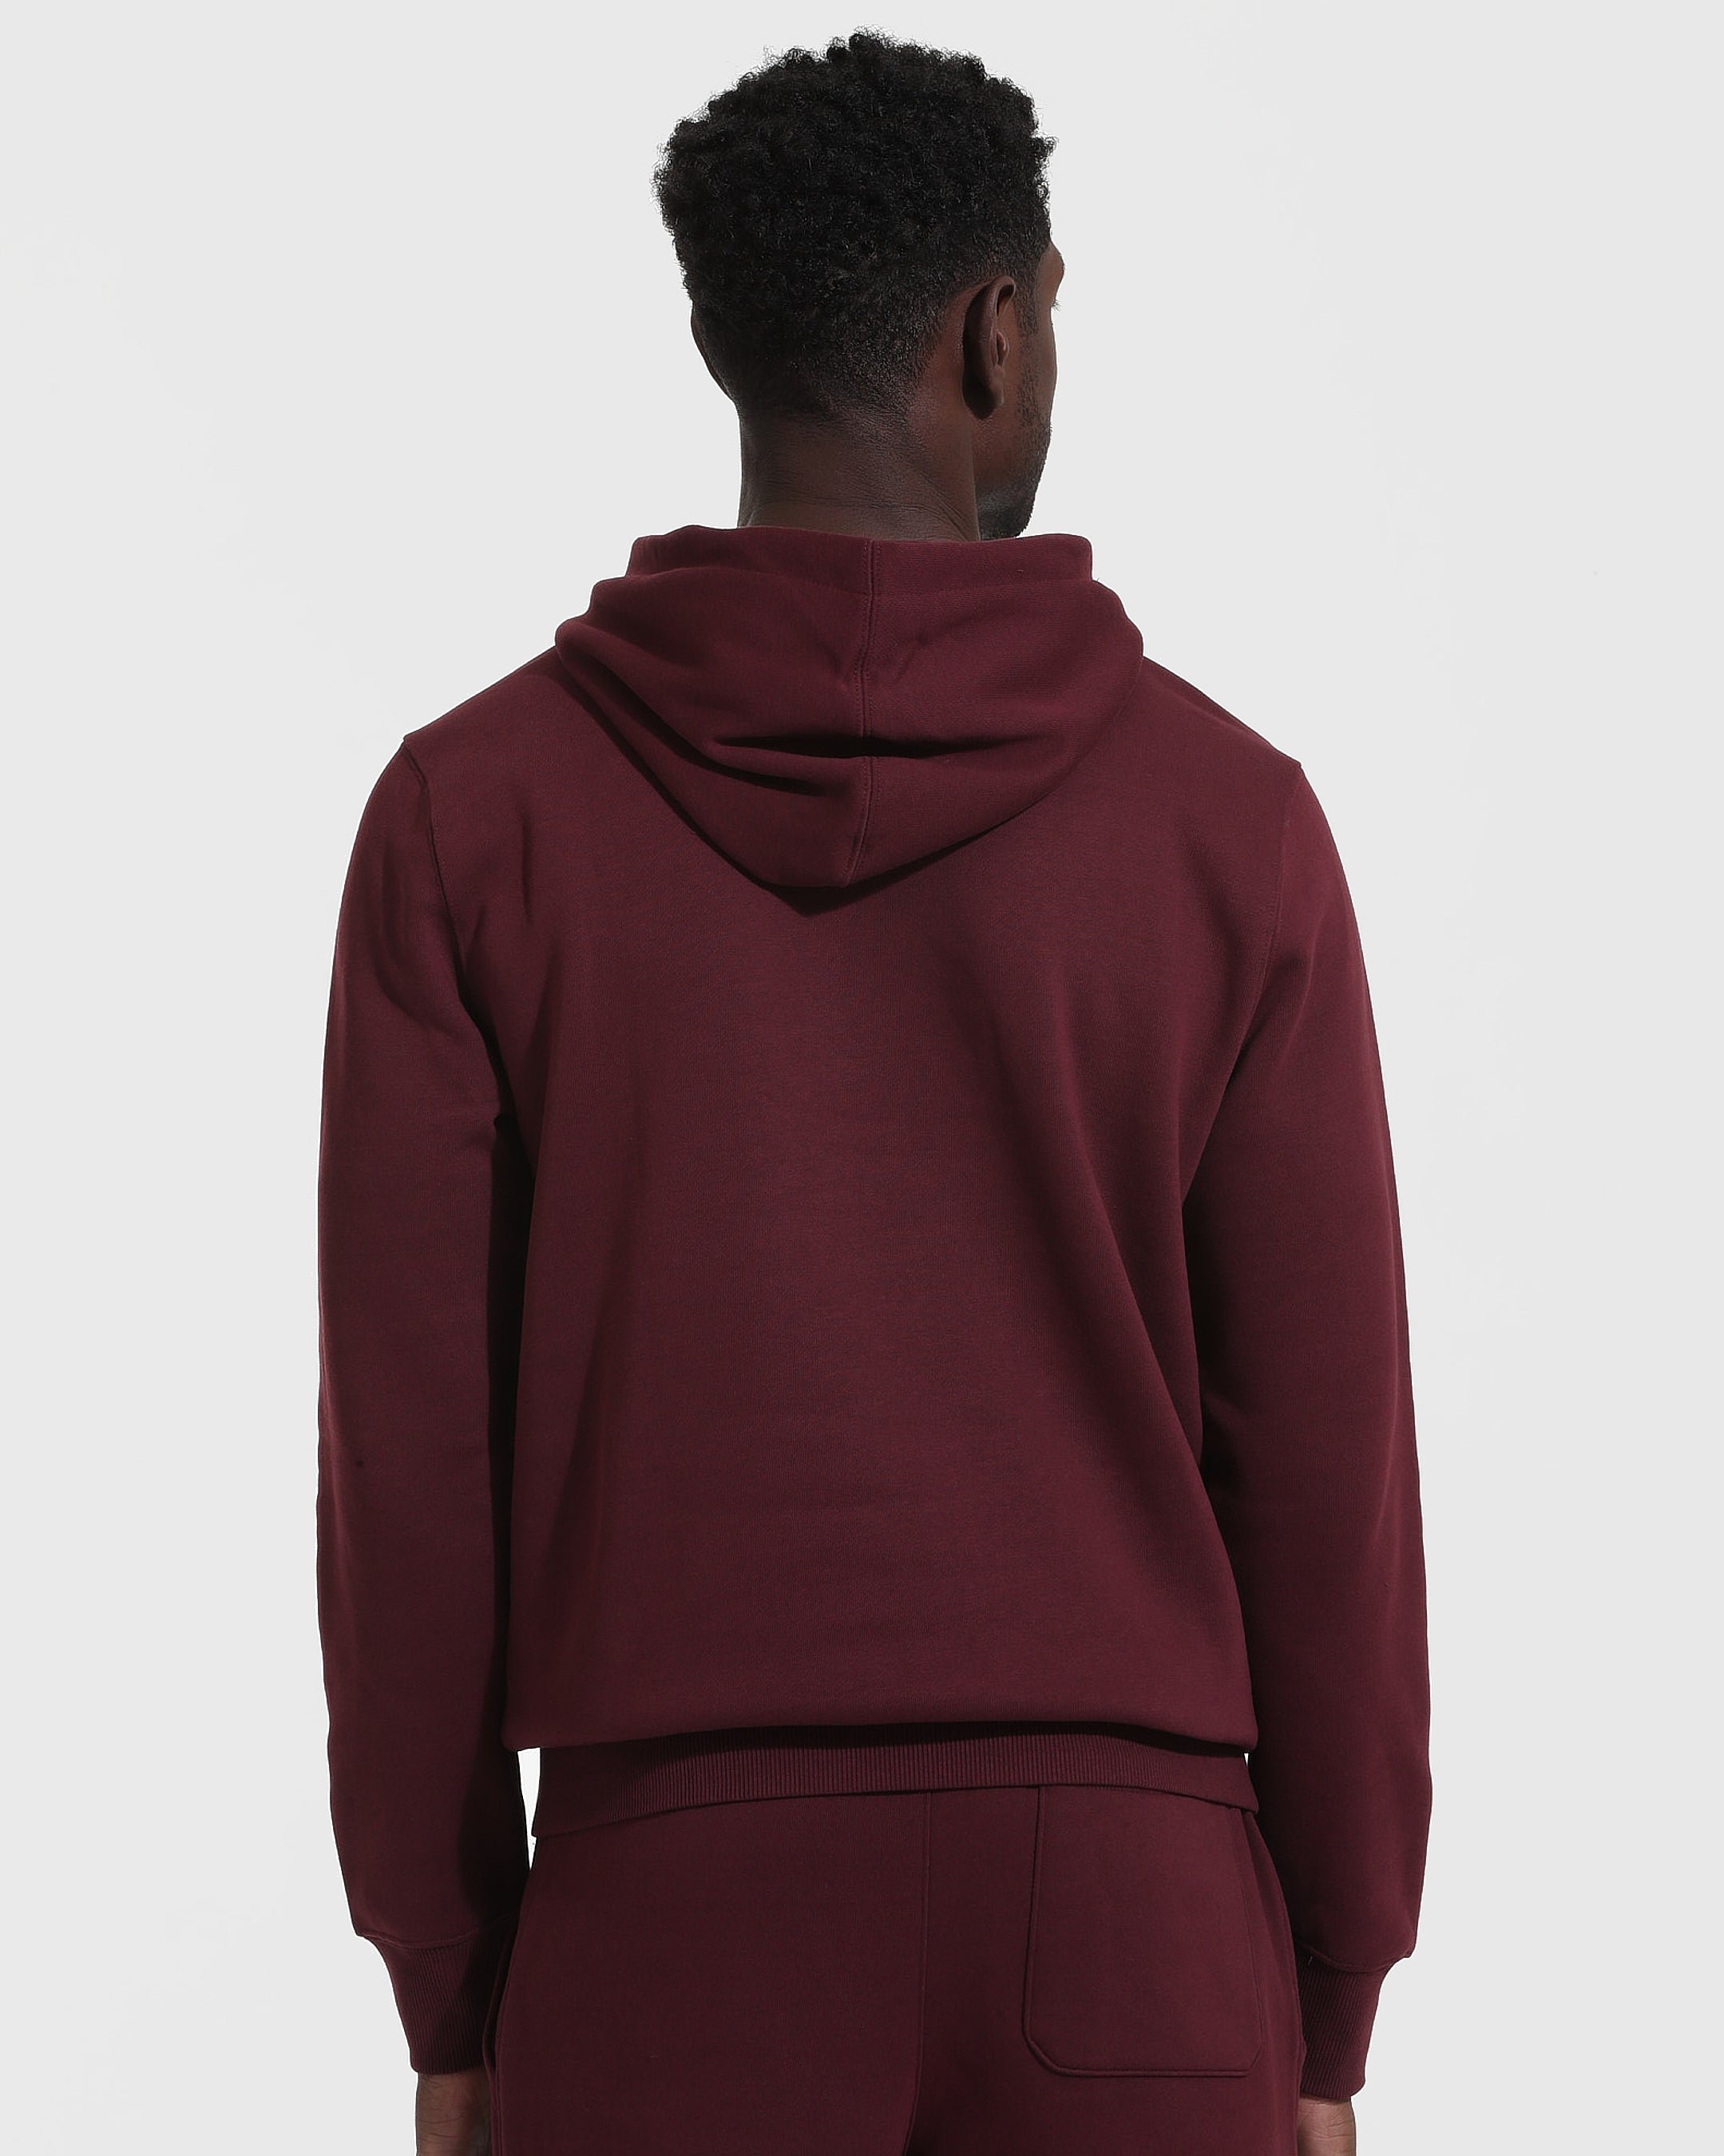 Mahogany Fleece French Terry Pullover Hoodie